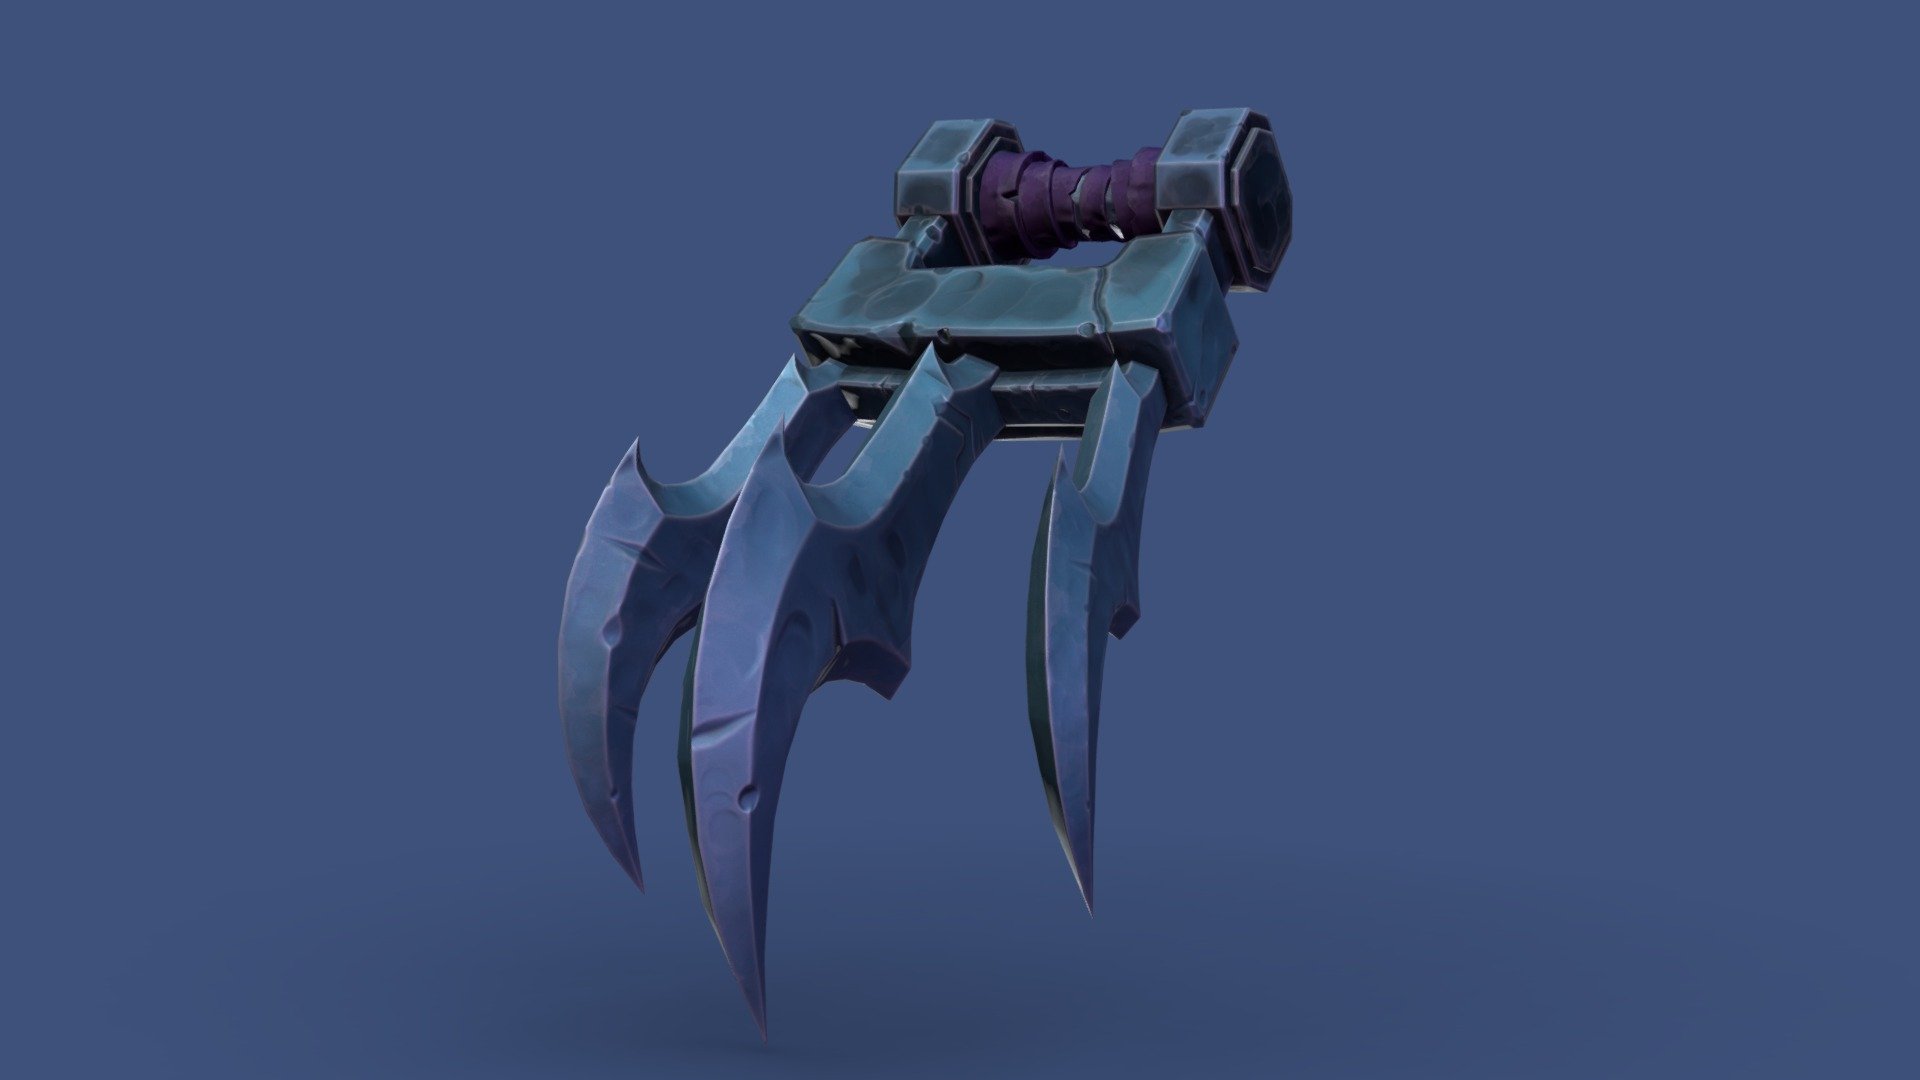 Stylized PBR Weapon in the shape of a combat claw :)

Model inspired by the gorgeous concept by Betty Jiang:
https://www.artstation.com/artwork/1lQze - Stylized Combat Claws - Download Free 3D model by Mikkel Garde Blaase (@plorigon) 3d model